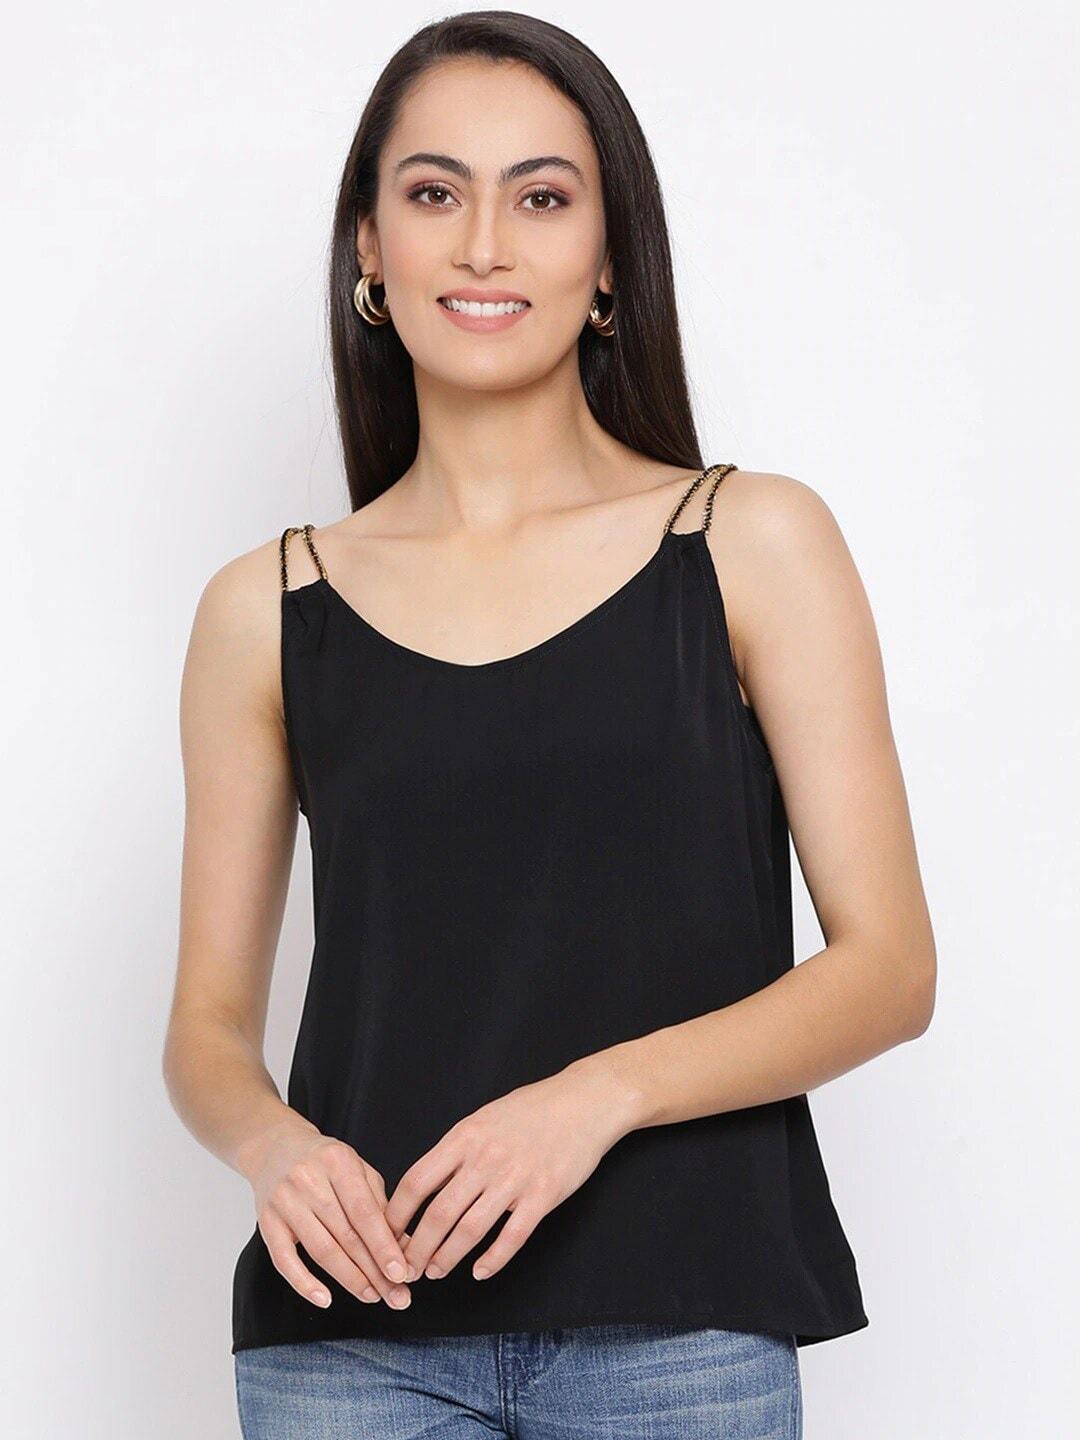 draax fashions black solid shoulder straps top